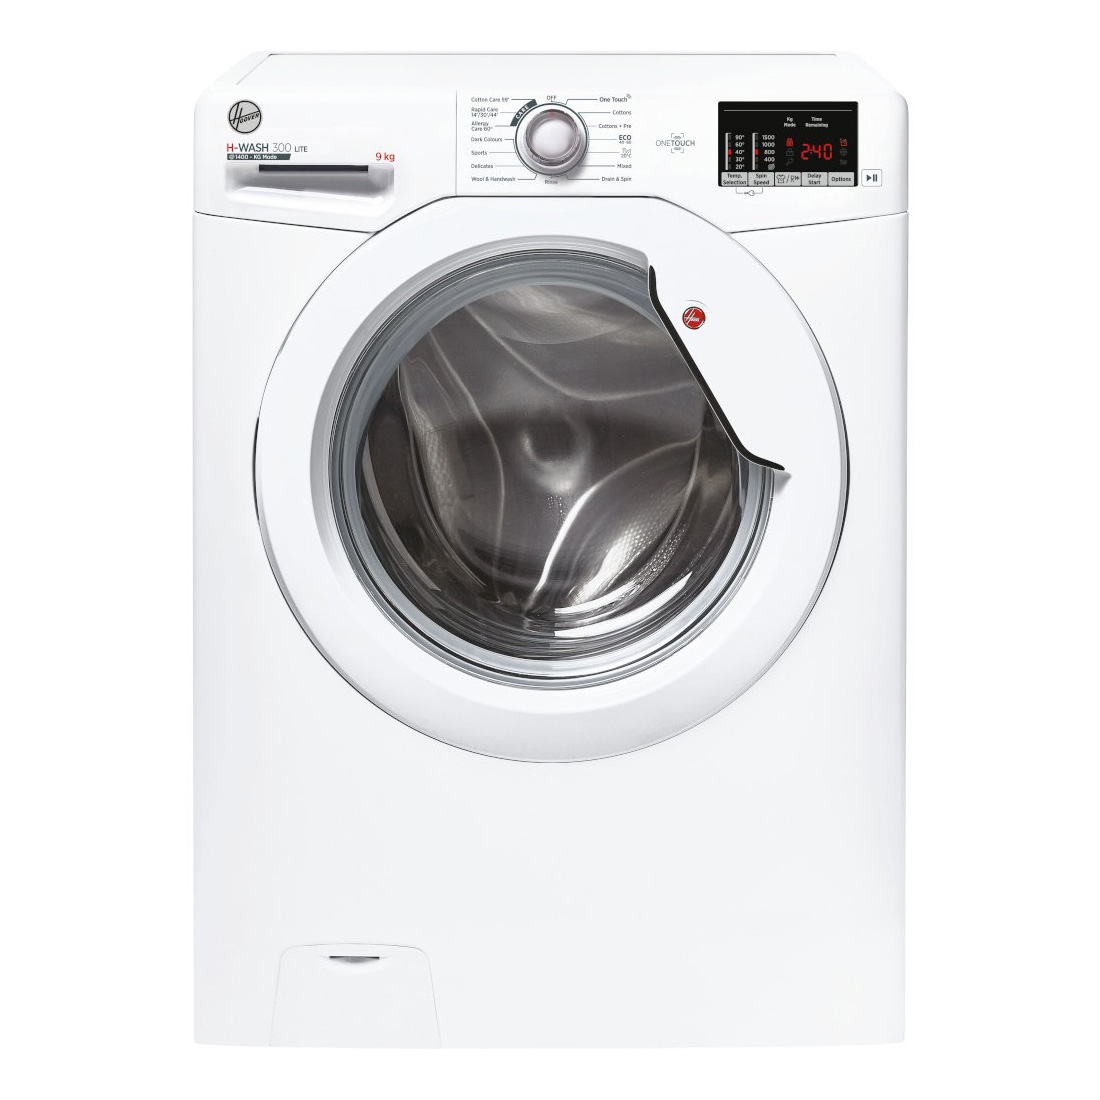 Image of Hoover H3W592DE Washing Machine in White 1500rpm 9Kg D Rated NFC